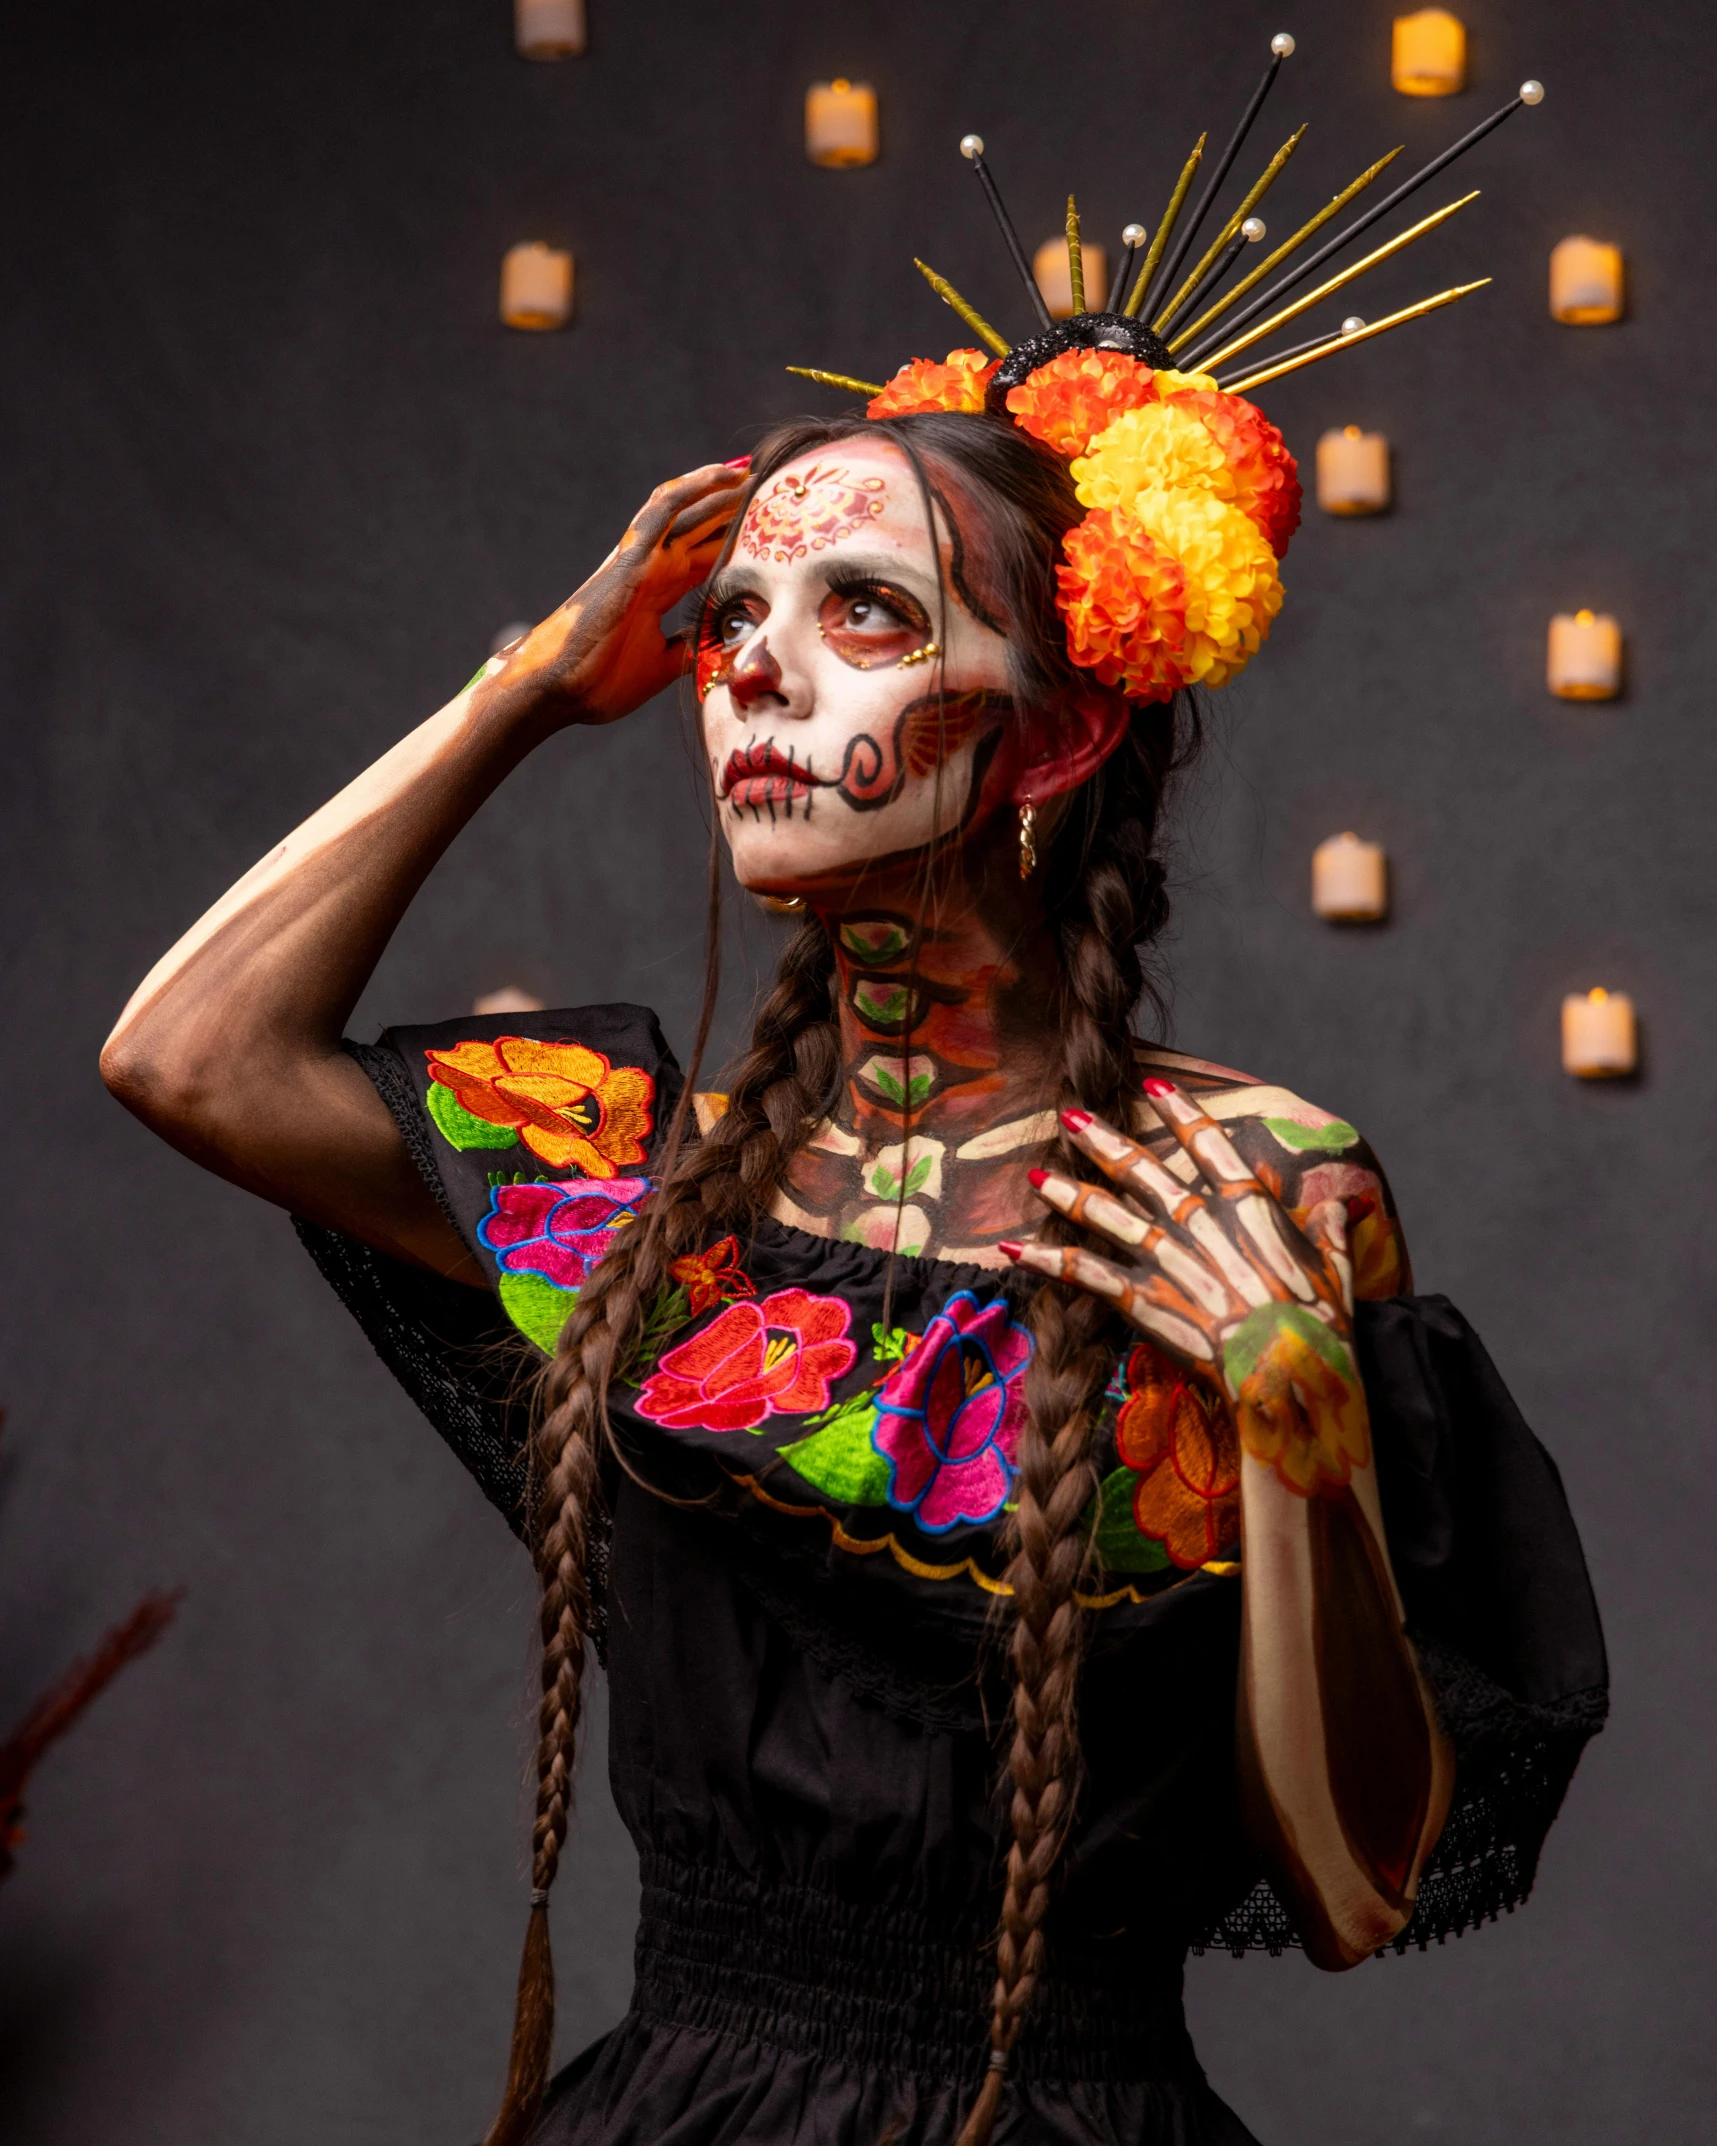 a woman with facial paint and ids holds her head to one side, wearing an elaborate skull make up and wreath around her face